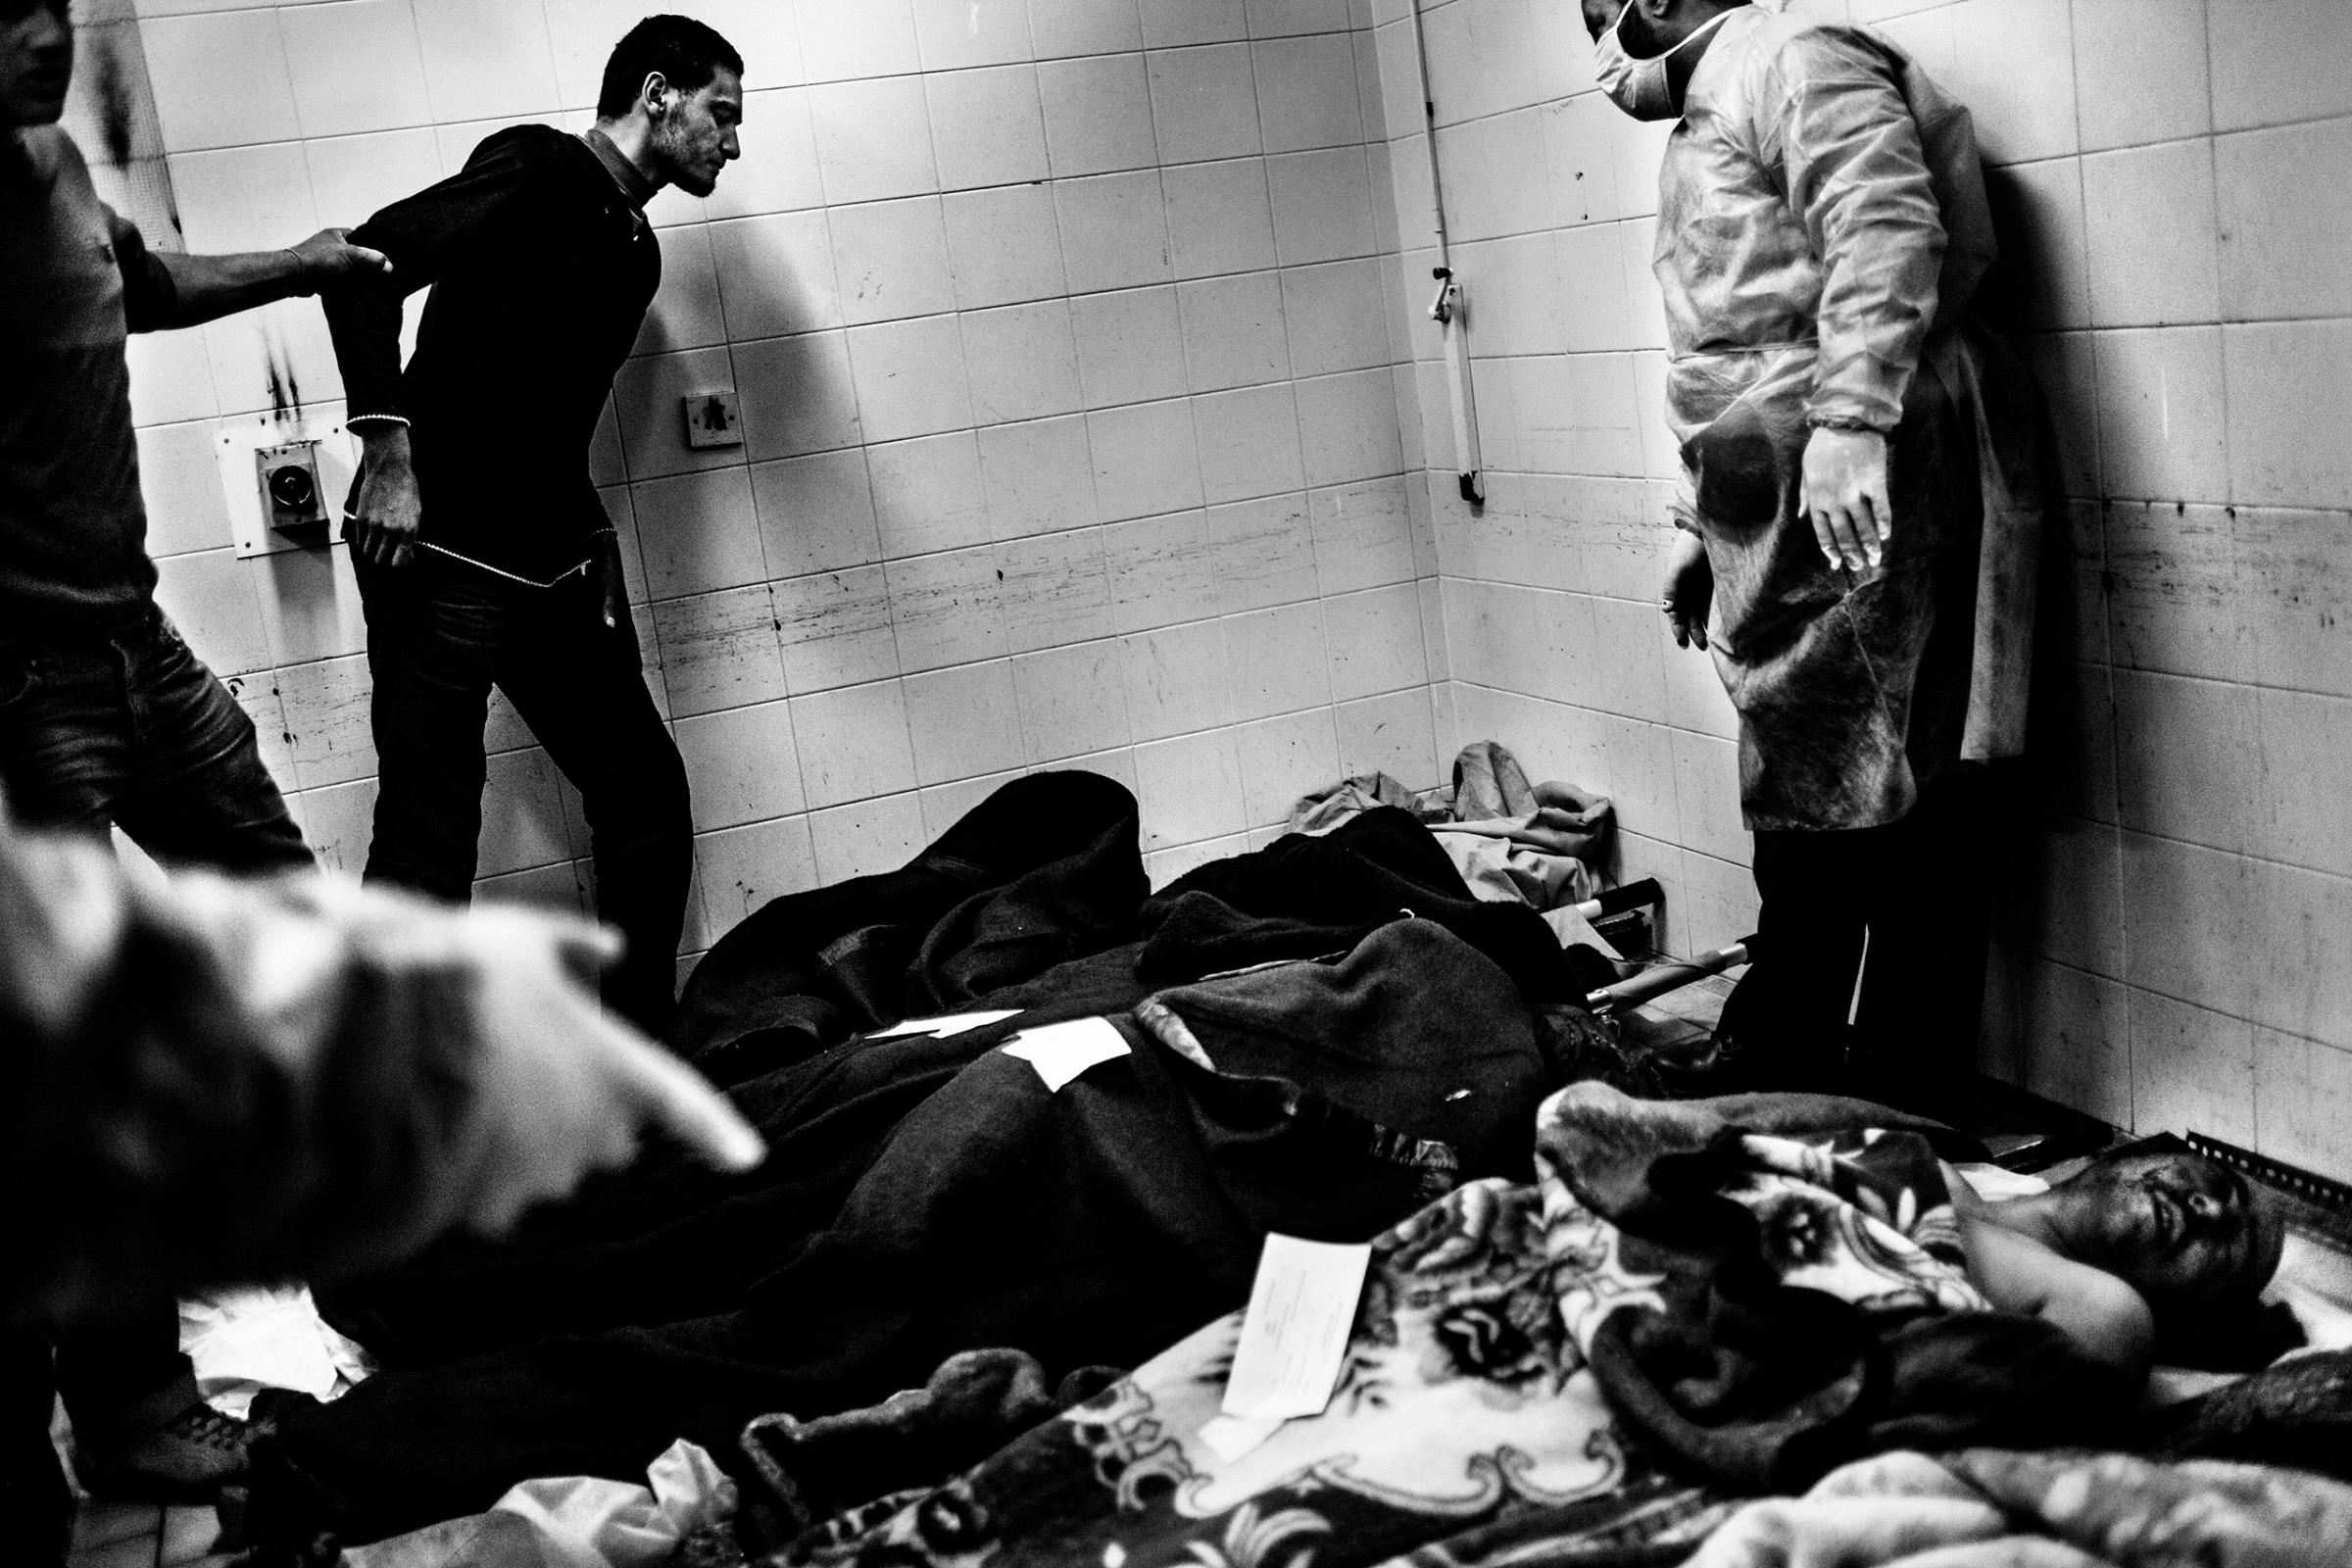 The relative of a victim approaches the body of a revolutionary fighter to recognize if it's its loved one. The victims are killed during the fighting against Gaddafi's forces on March 4, 2011.  Benghazi, Libya.